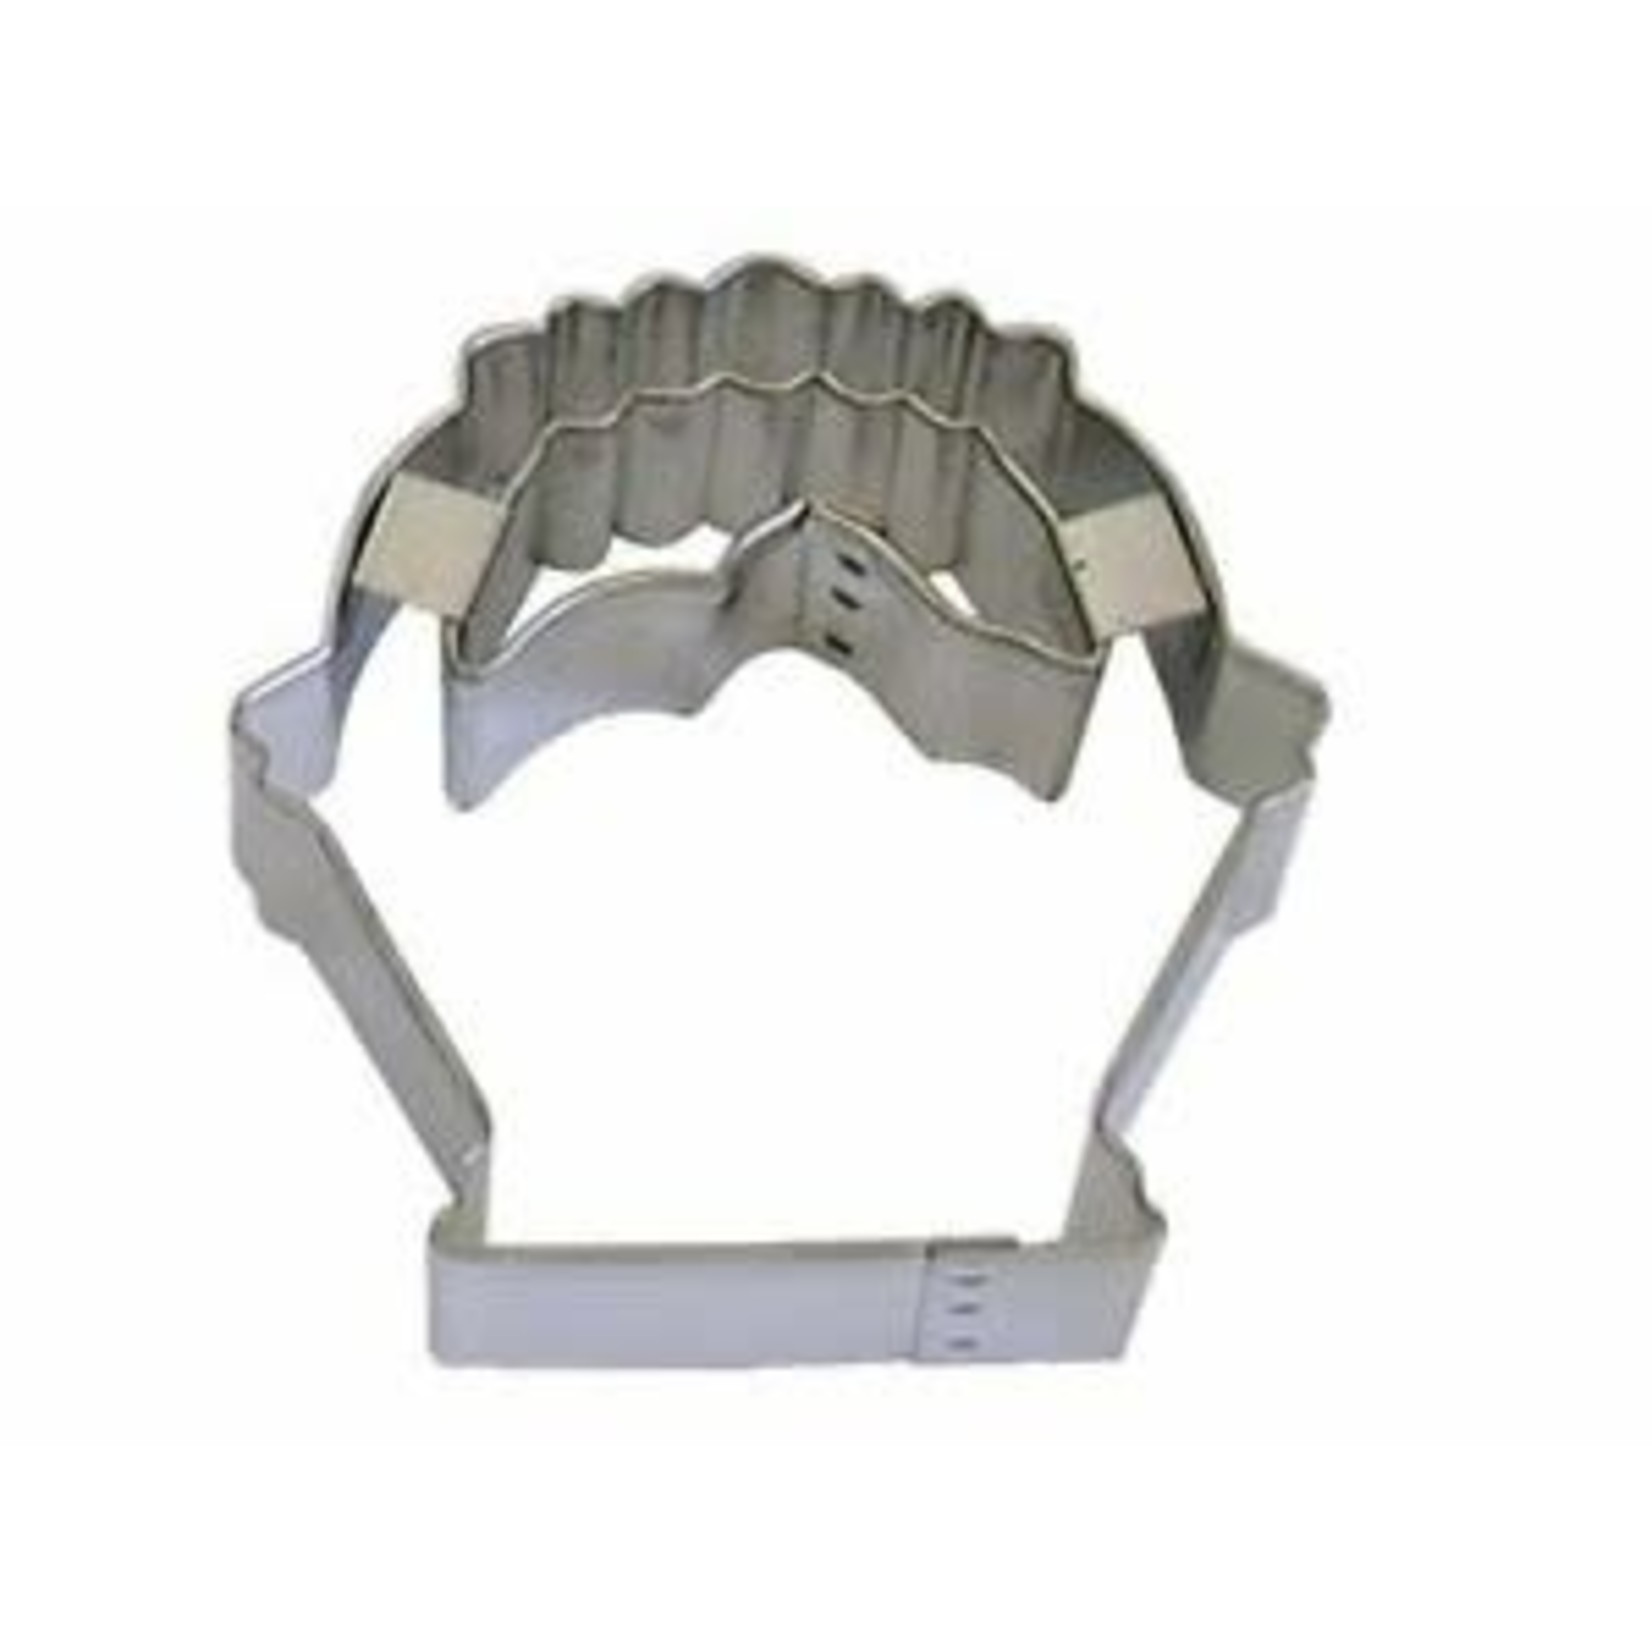 3" Basket Shaped Cookie Cutter